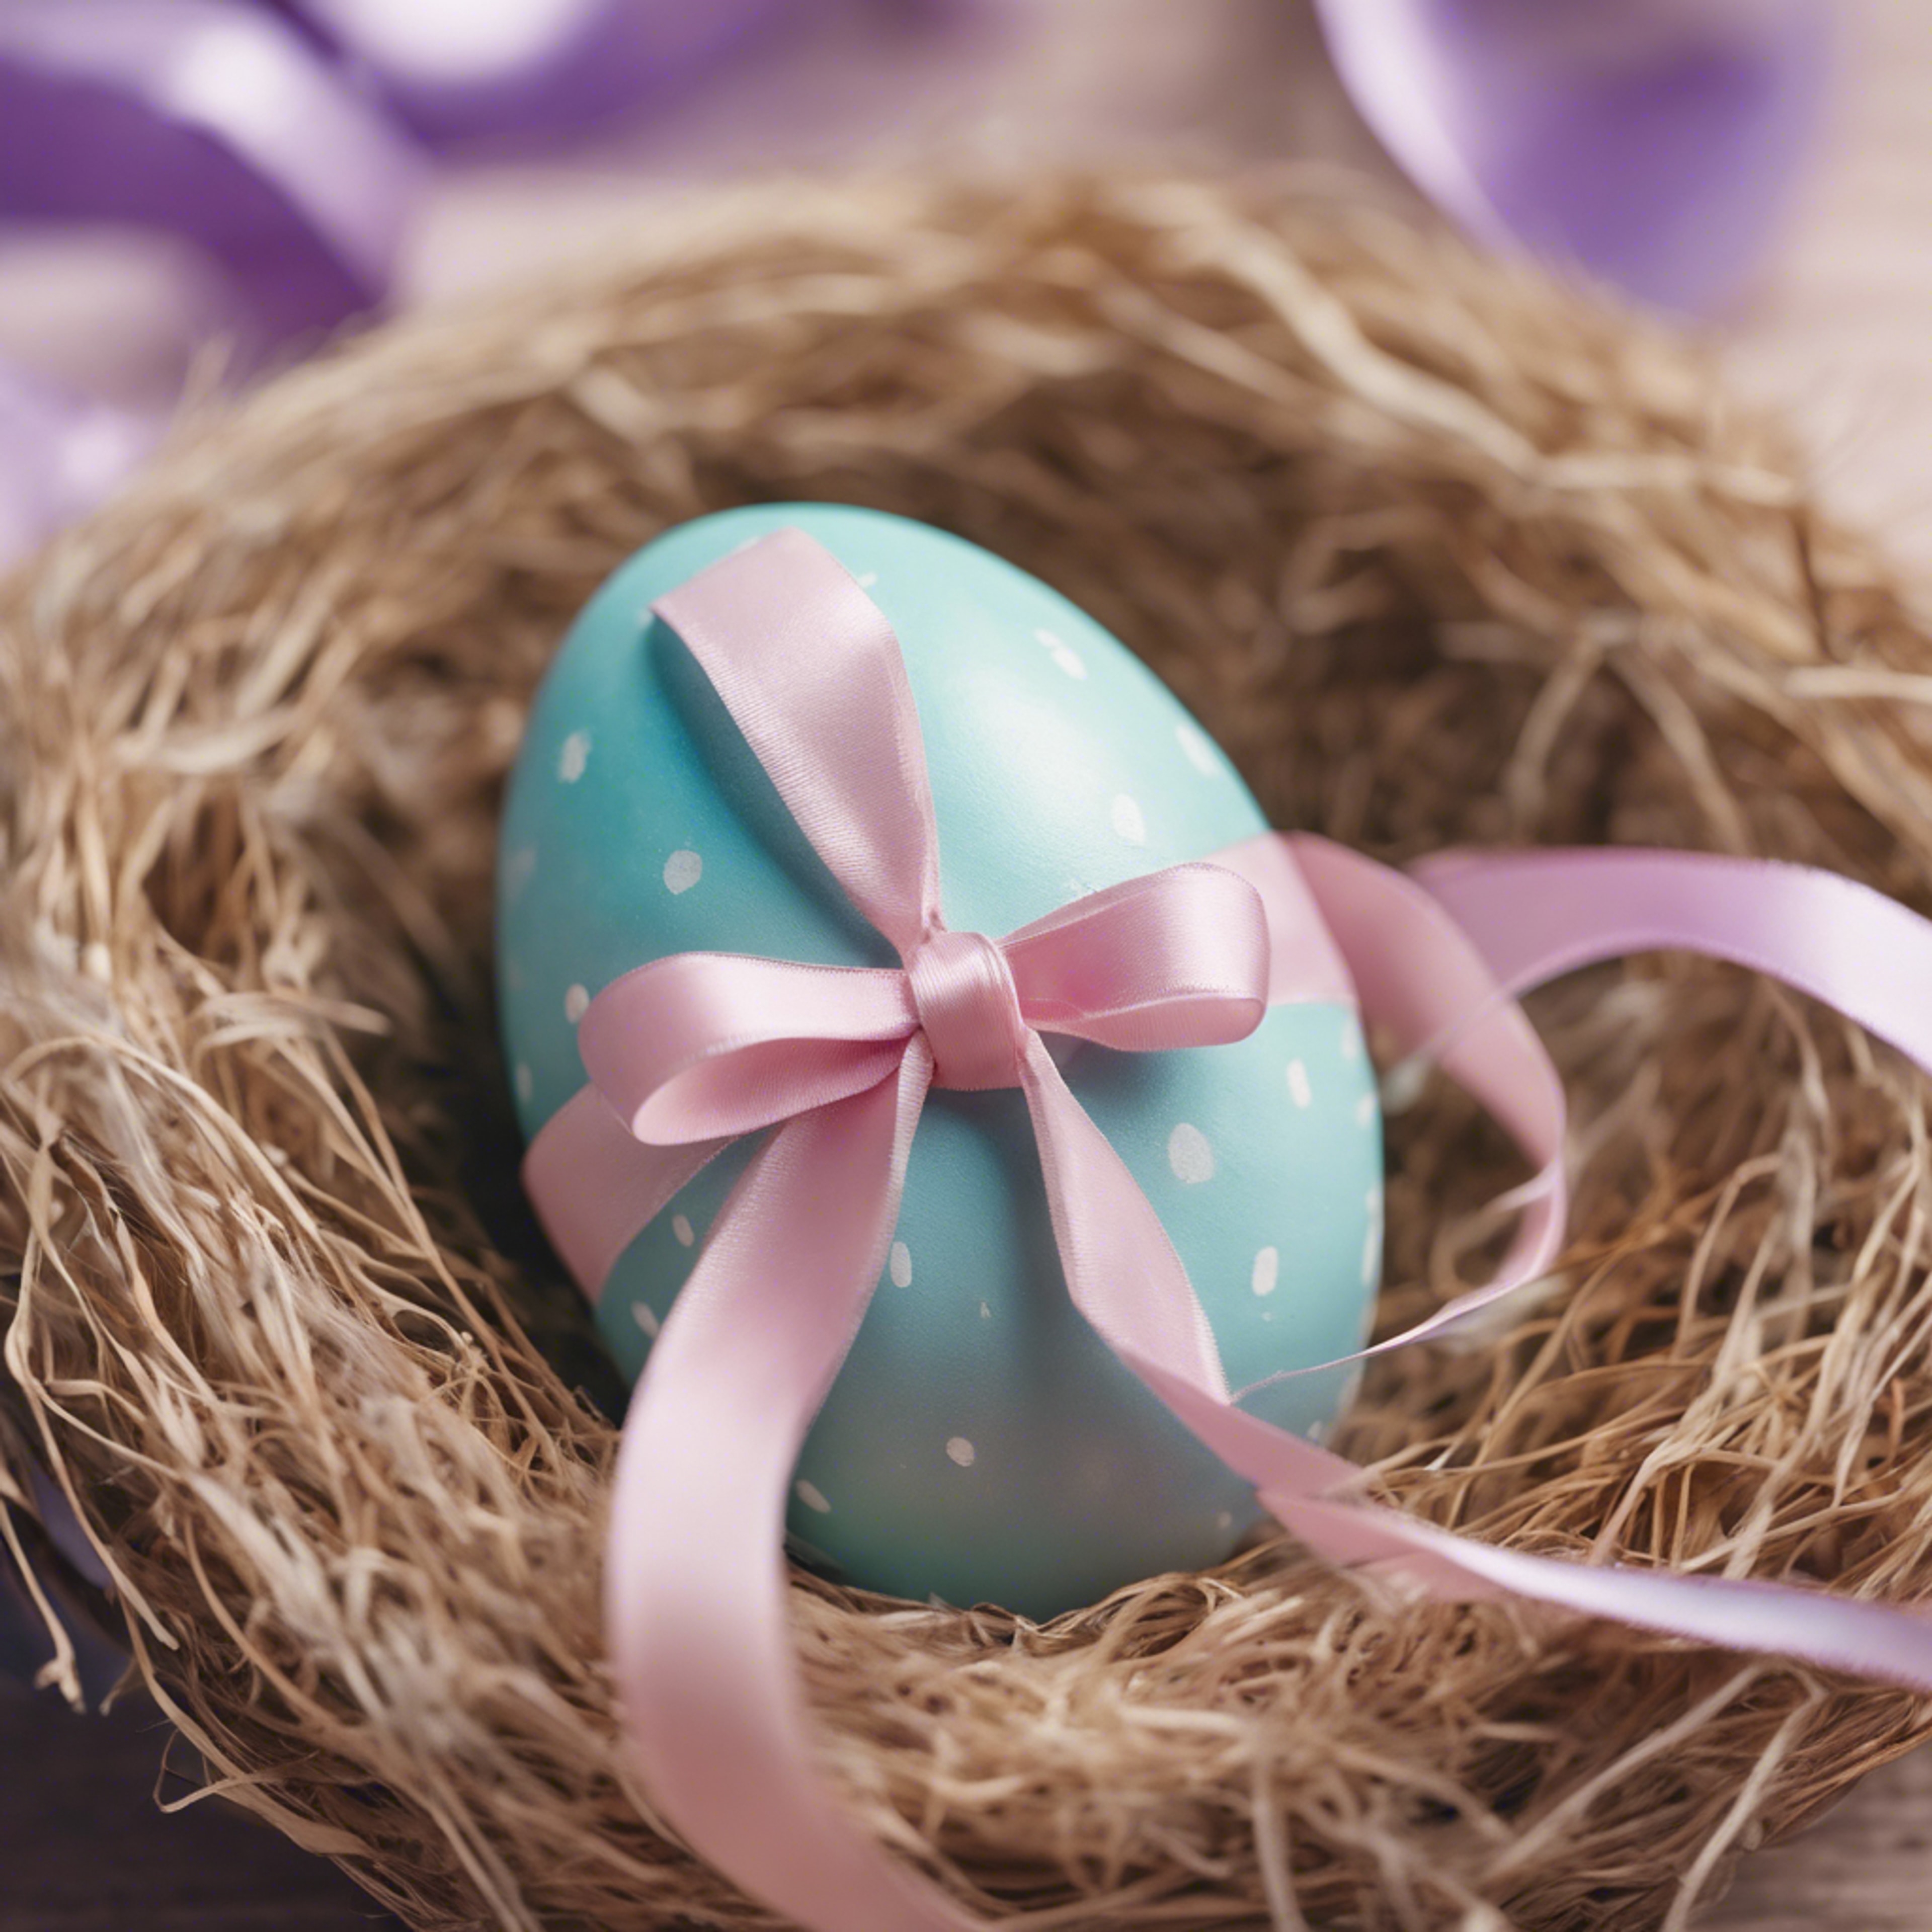 Close-up image of a pastel-colored Easter egg with ribbon details, on a nest.壁紙[582f95aee8b94a49b4e5]